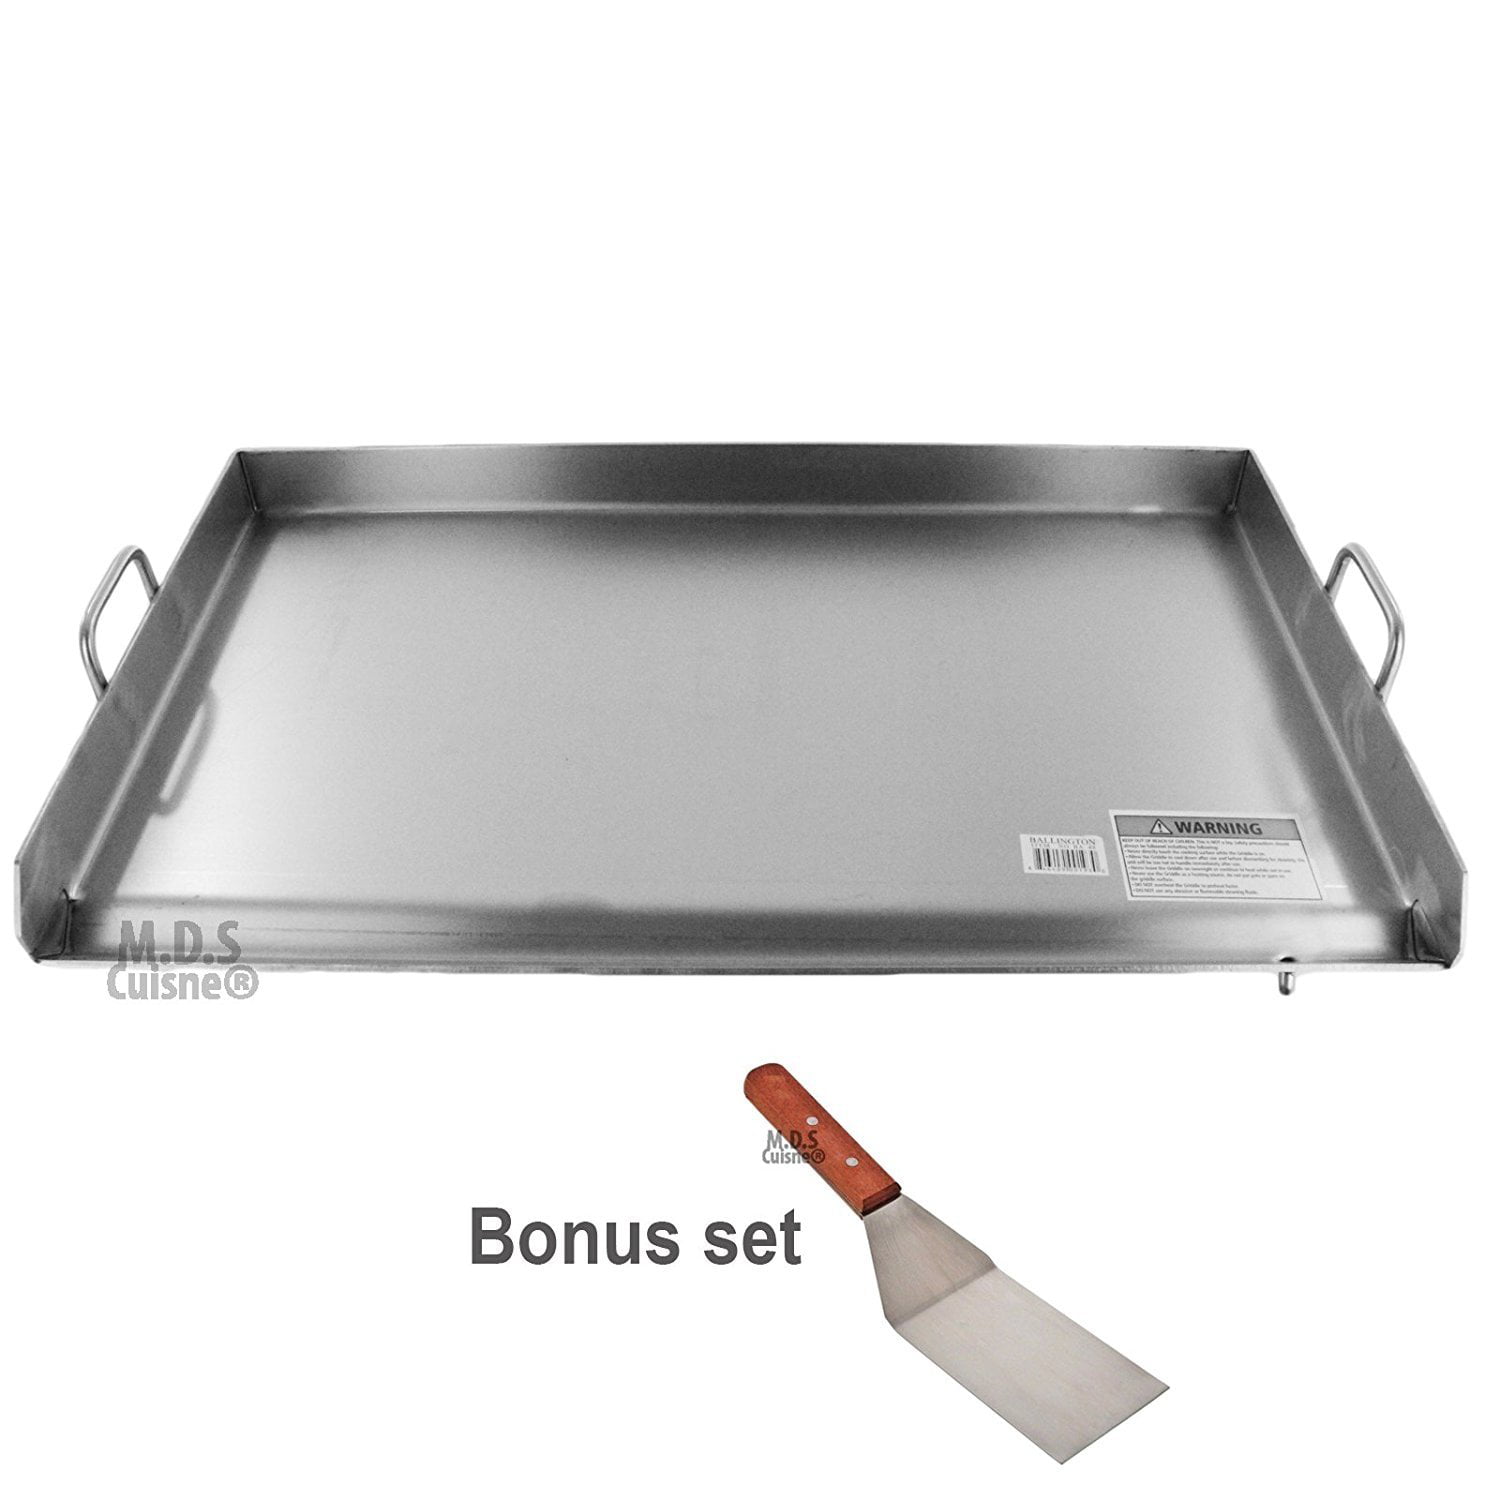 Griddle Stainless Steel Flat Top 36"x22" Comal Plancha Outdoor Stove Stainless Steel Comal Flat Top